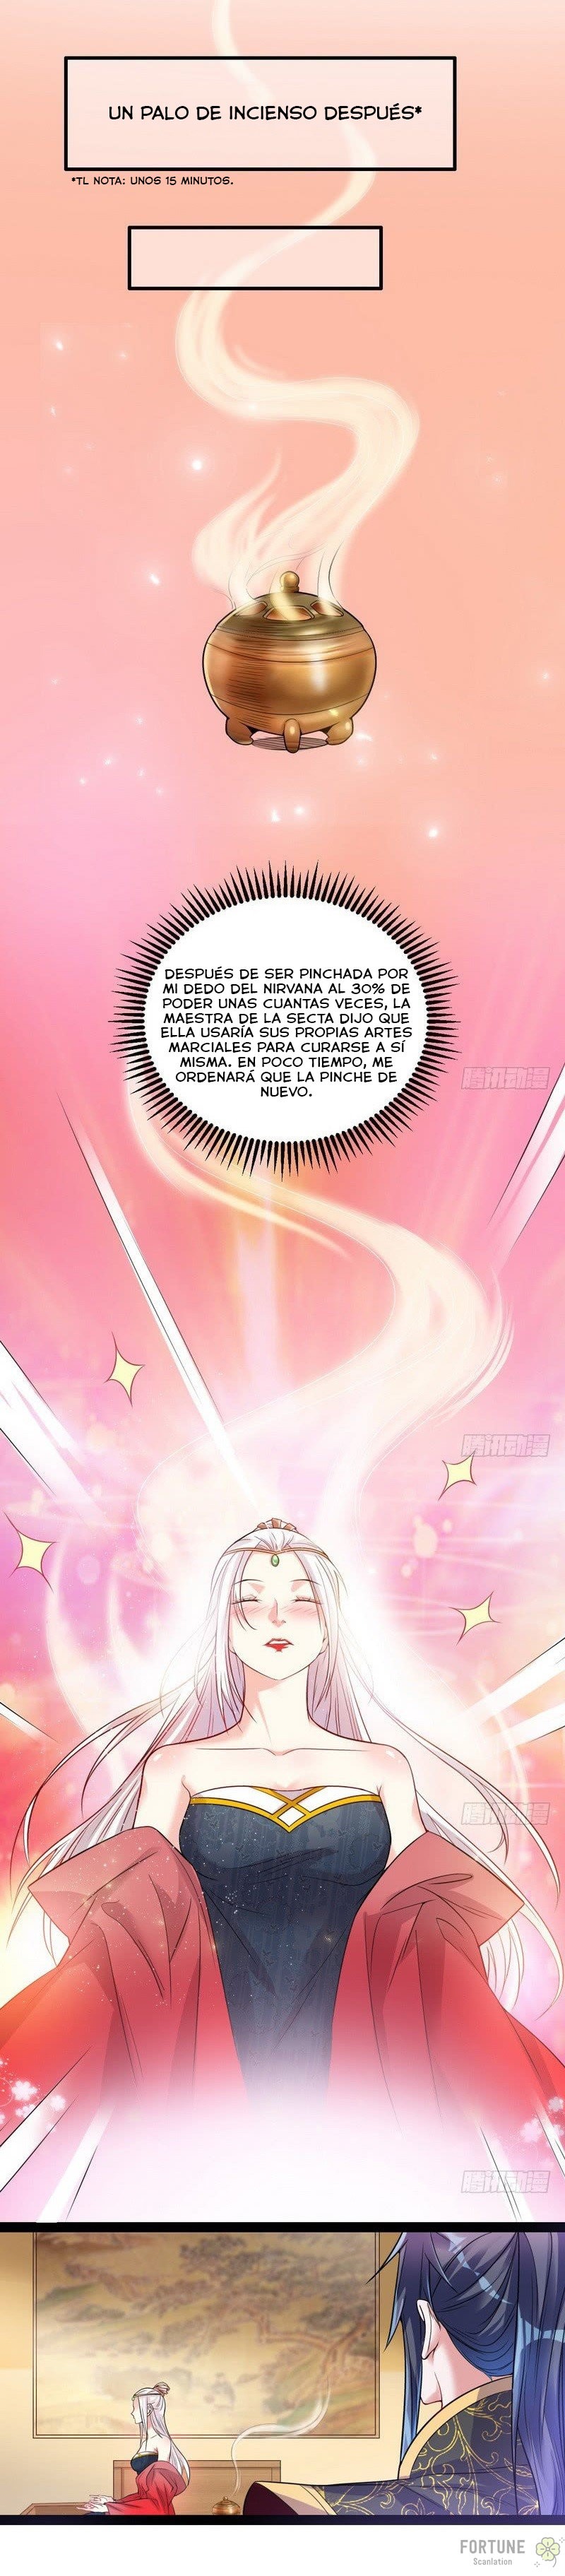 Manga Soy un dios maligno Chapter 10 image number 23